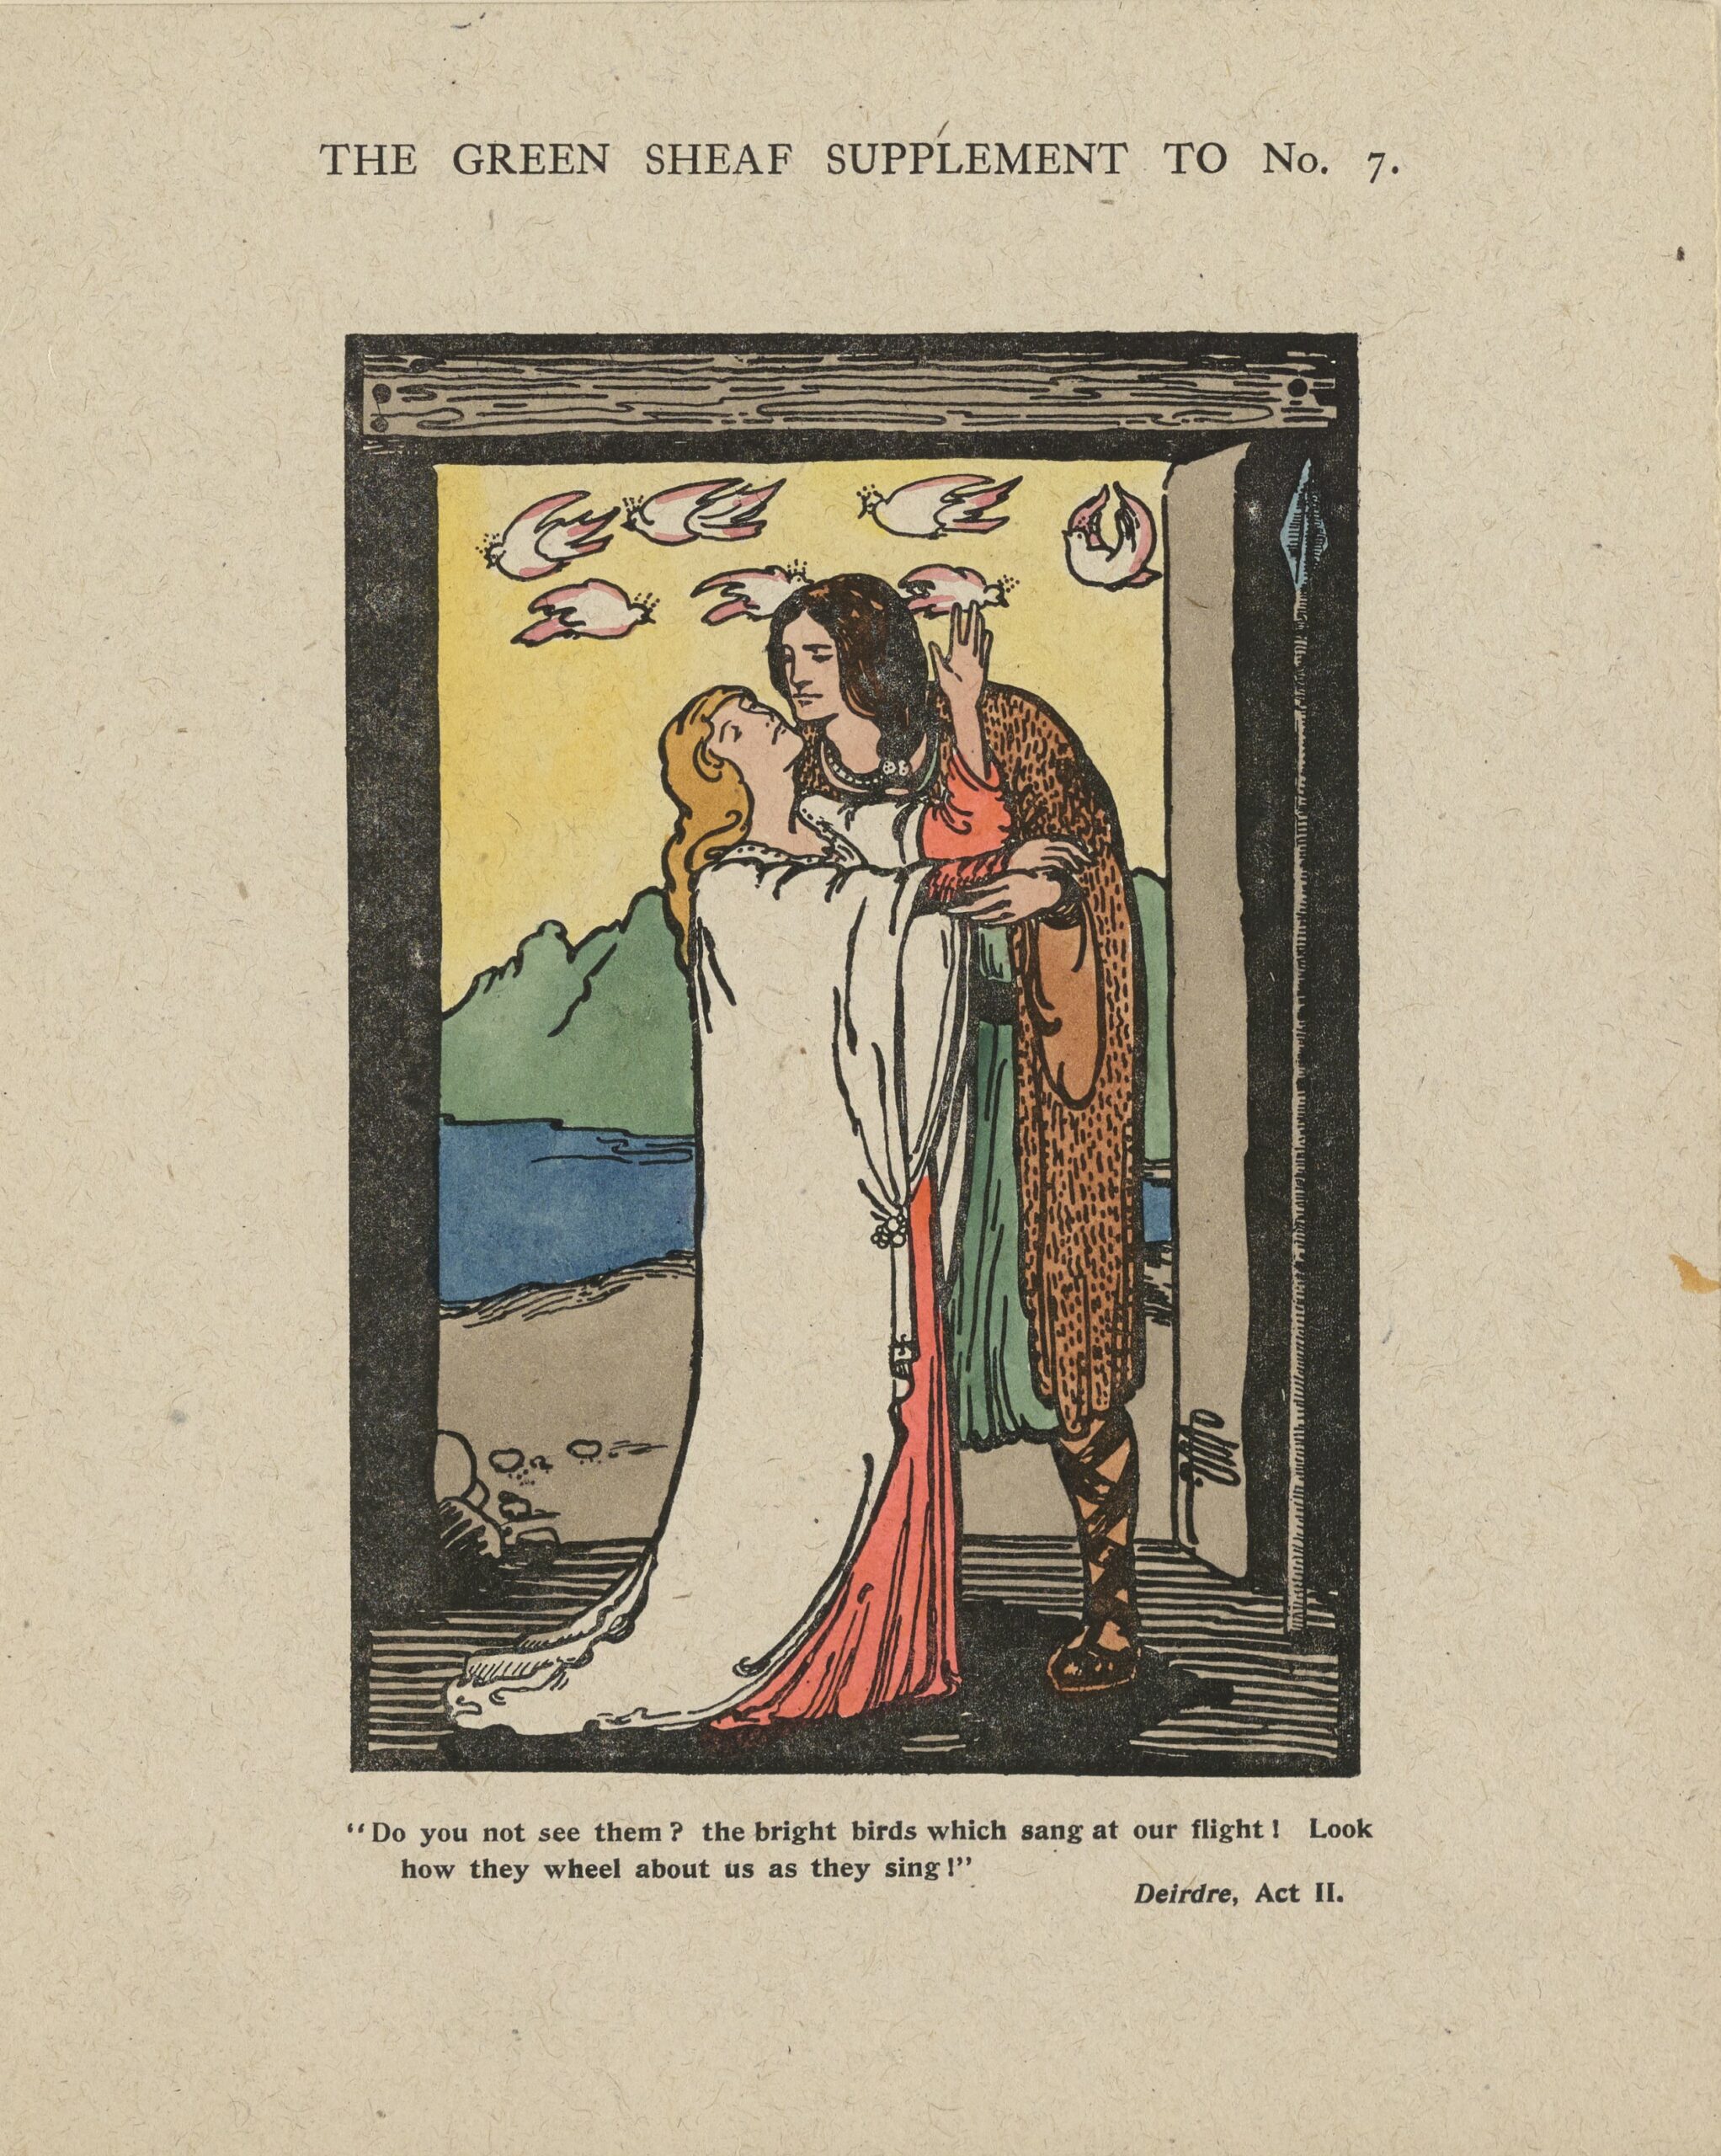 The hand-coloured illustration is framed with a thick black rectangular border, in portrait orientation. The frame doubles as a doorway with a brown wood-grained lintel, in which two figures stand in an embrace. On the left is a woman (Deirdre), pale-skinned with long golden hair, wearing a white robe over an orange dress. She faces right, her face tipped back and arms raised. She embraces a pale-skinned man (Naisi) with black hair, a green tunic, a brown, animal-fur robe, and criss-crossed, laced sandals. He faces left, gazing down at the woman. Above and behind them in the sky fly 7 white birds or doves. Beside the doorway on the right, a long spear rests against the wall. Behind the figures through the doorway one can see a blue sea, green hills, and yellow sky. The artist’s monogram is on the bottom right corner of the doorway. Below the image the following text is printed: “Do you not see them? The bright birds which sang at our flight! Look how they wheel about us as they sing!” Deirdre, Act II.